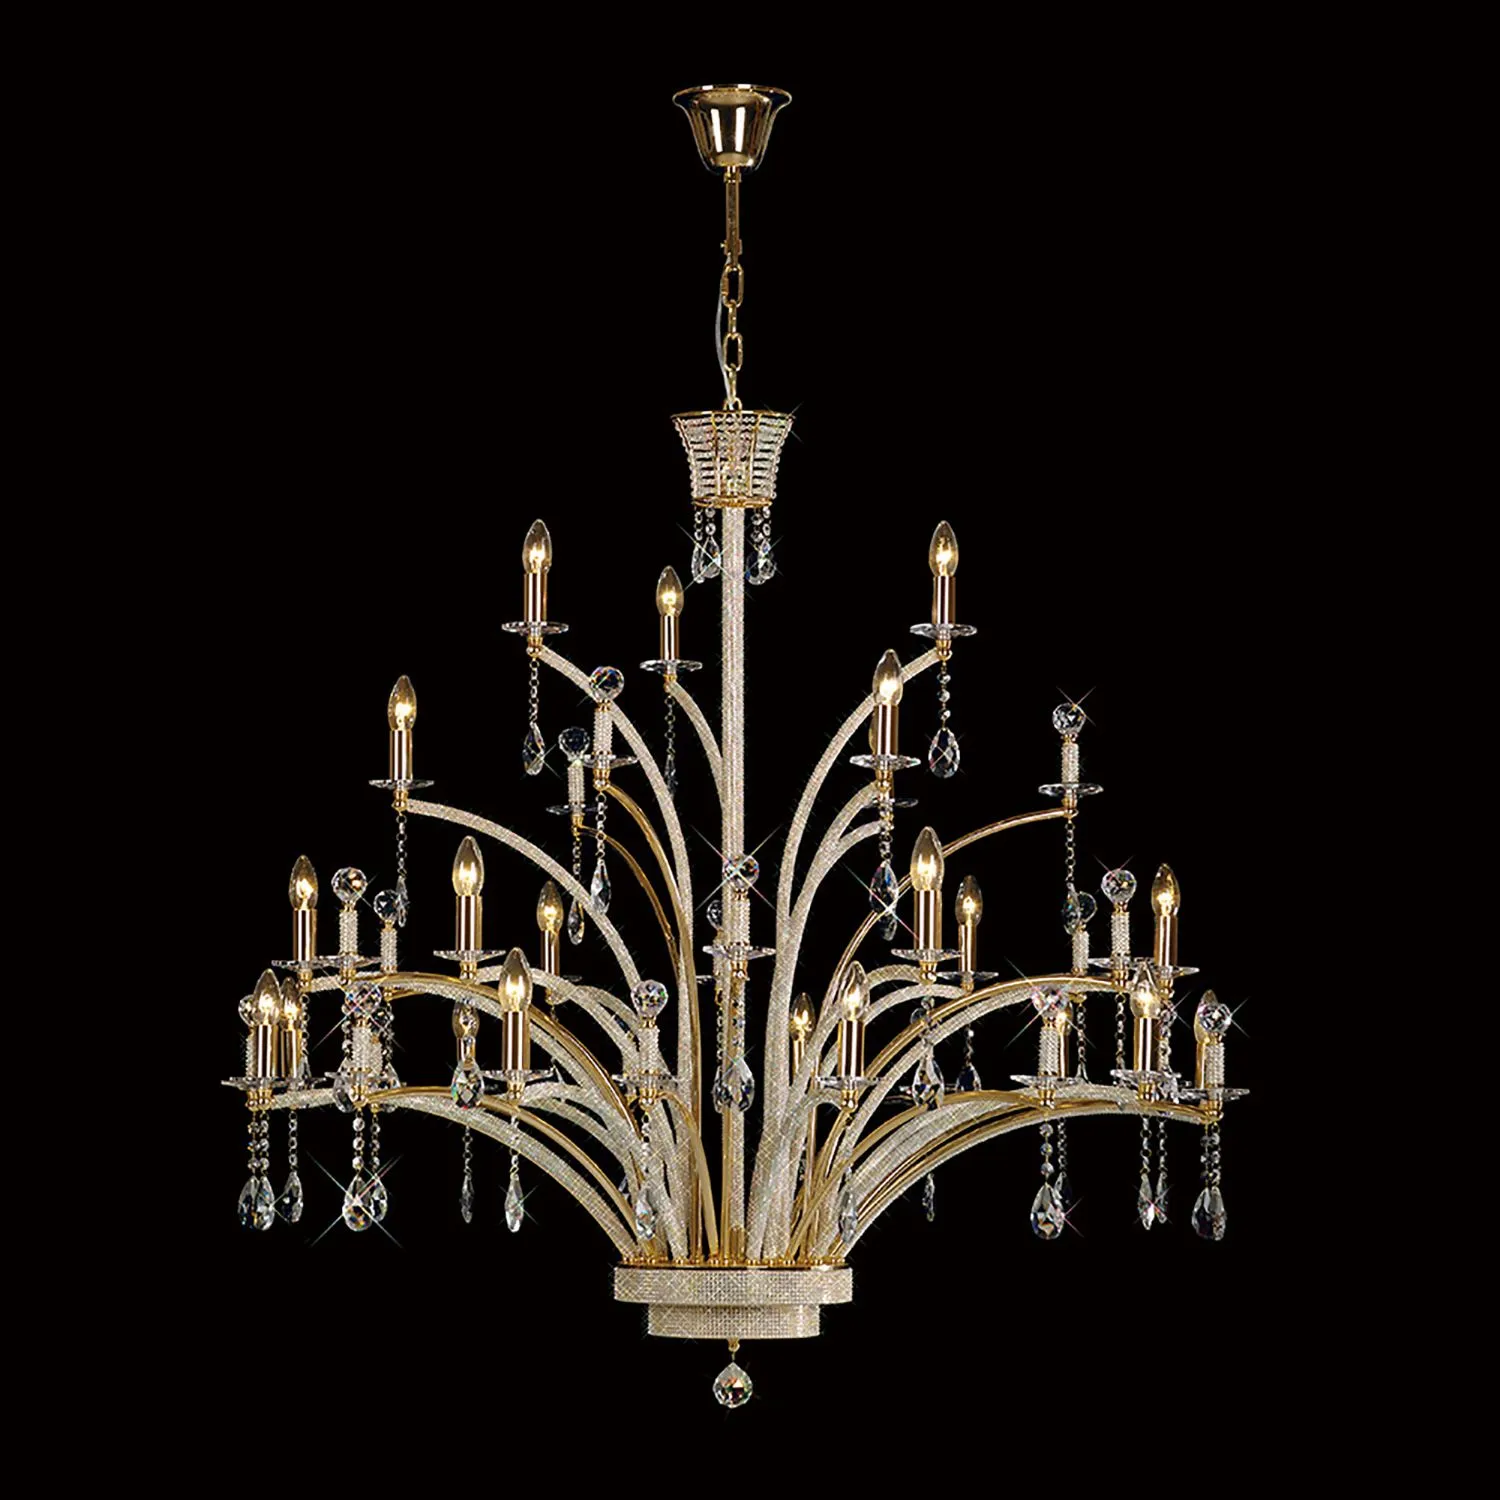 Orlando Pendant 21 Light E14 French Gold Crystal (Pallet Shipment Only), (ITEM REQUIRES CONSTRUCTION CONNECTION) Item Weight: 30kg